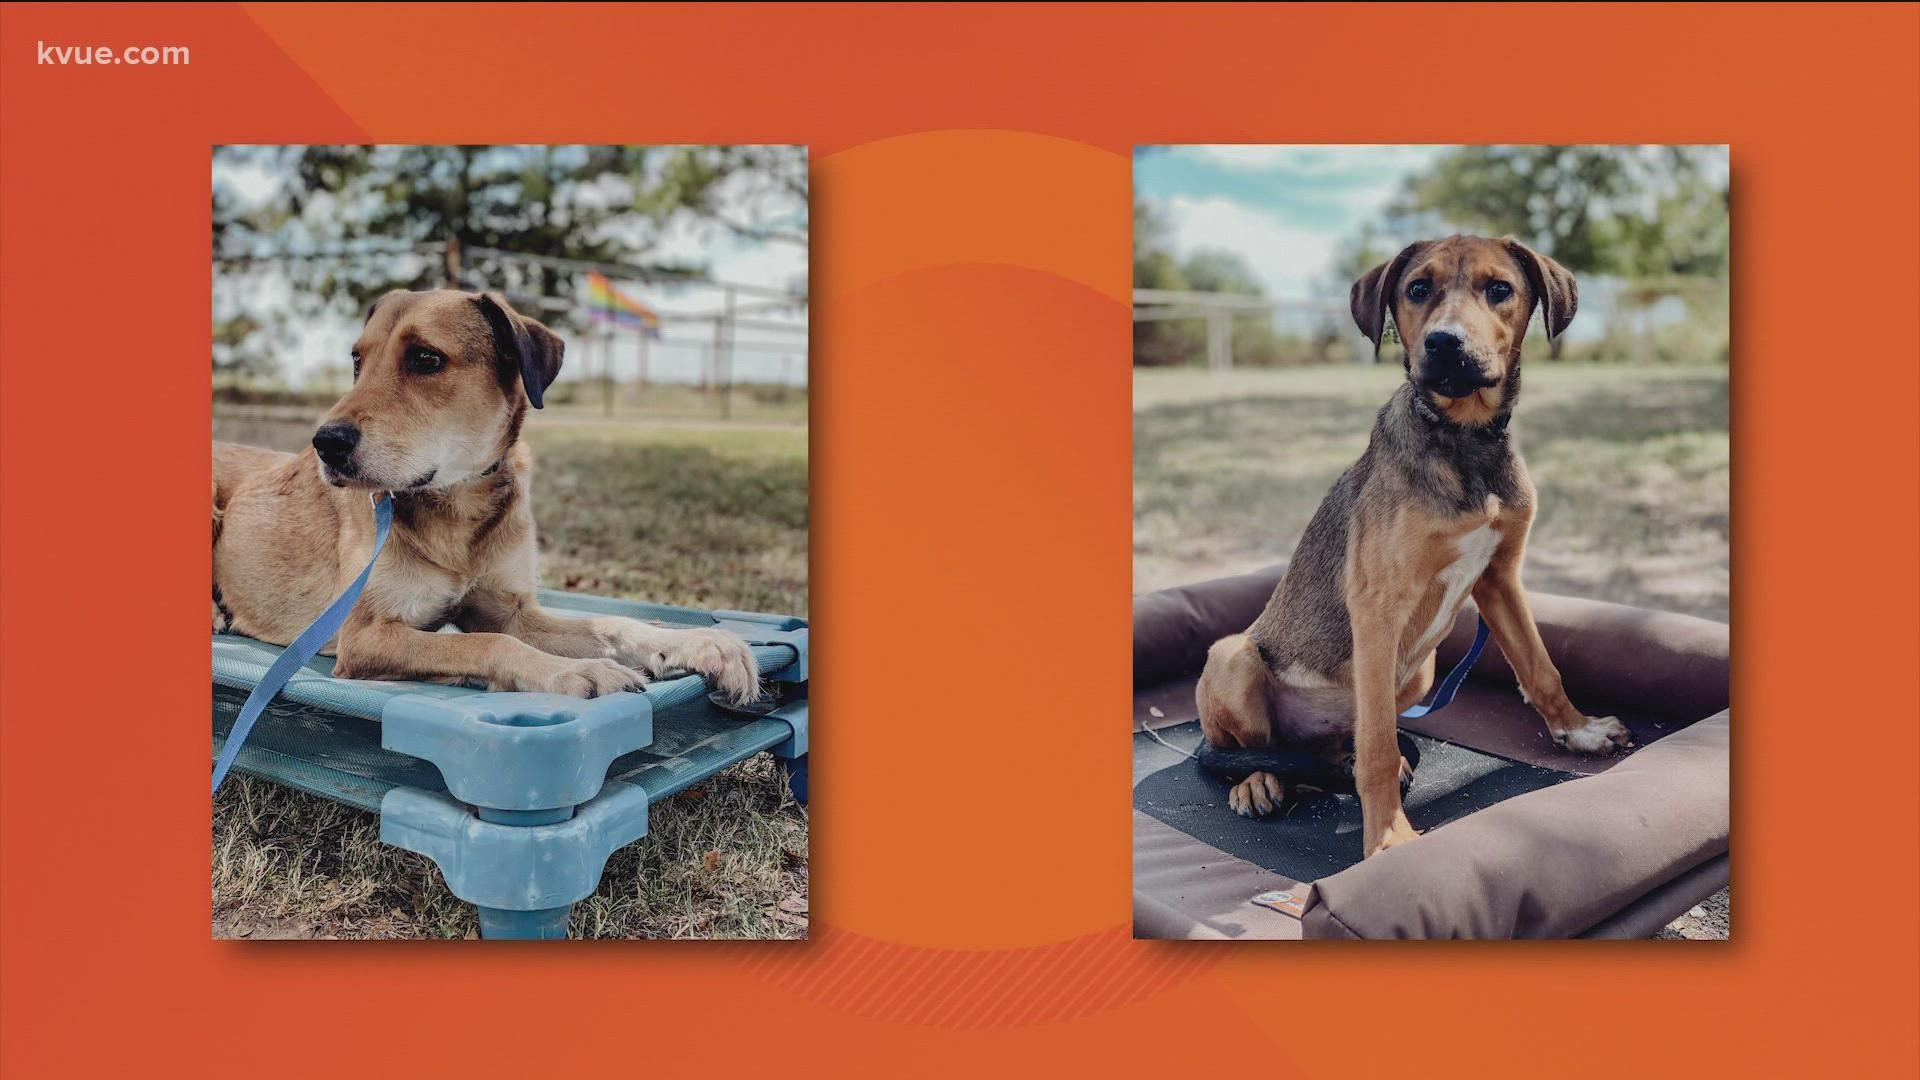 When Tim O'Conner died from cancer recently, he left behind his dogs, Bobbie and Yoyo. So, Willie Nelson's daughters stepped in to help rescue them.